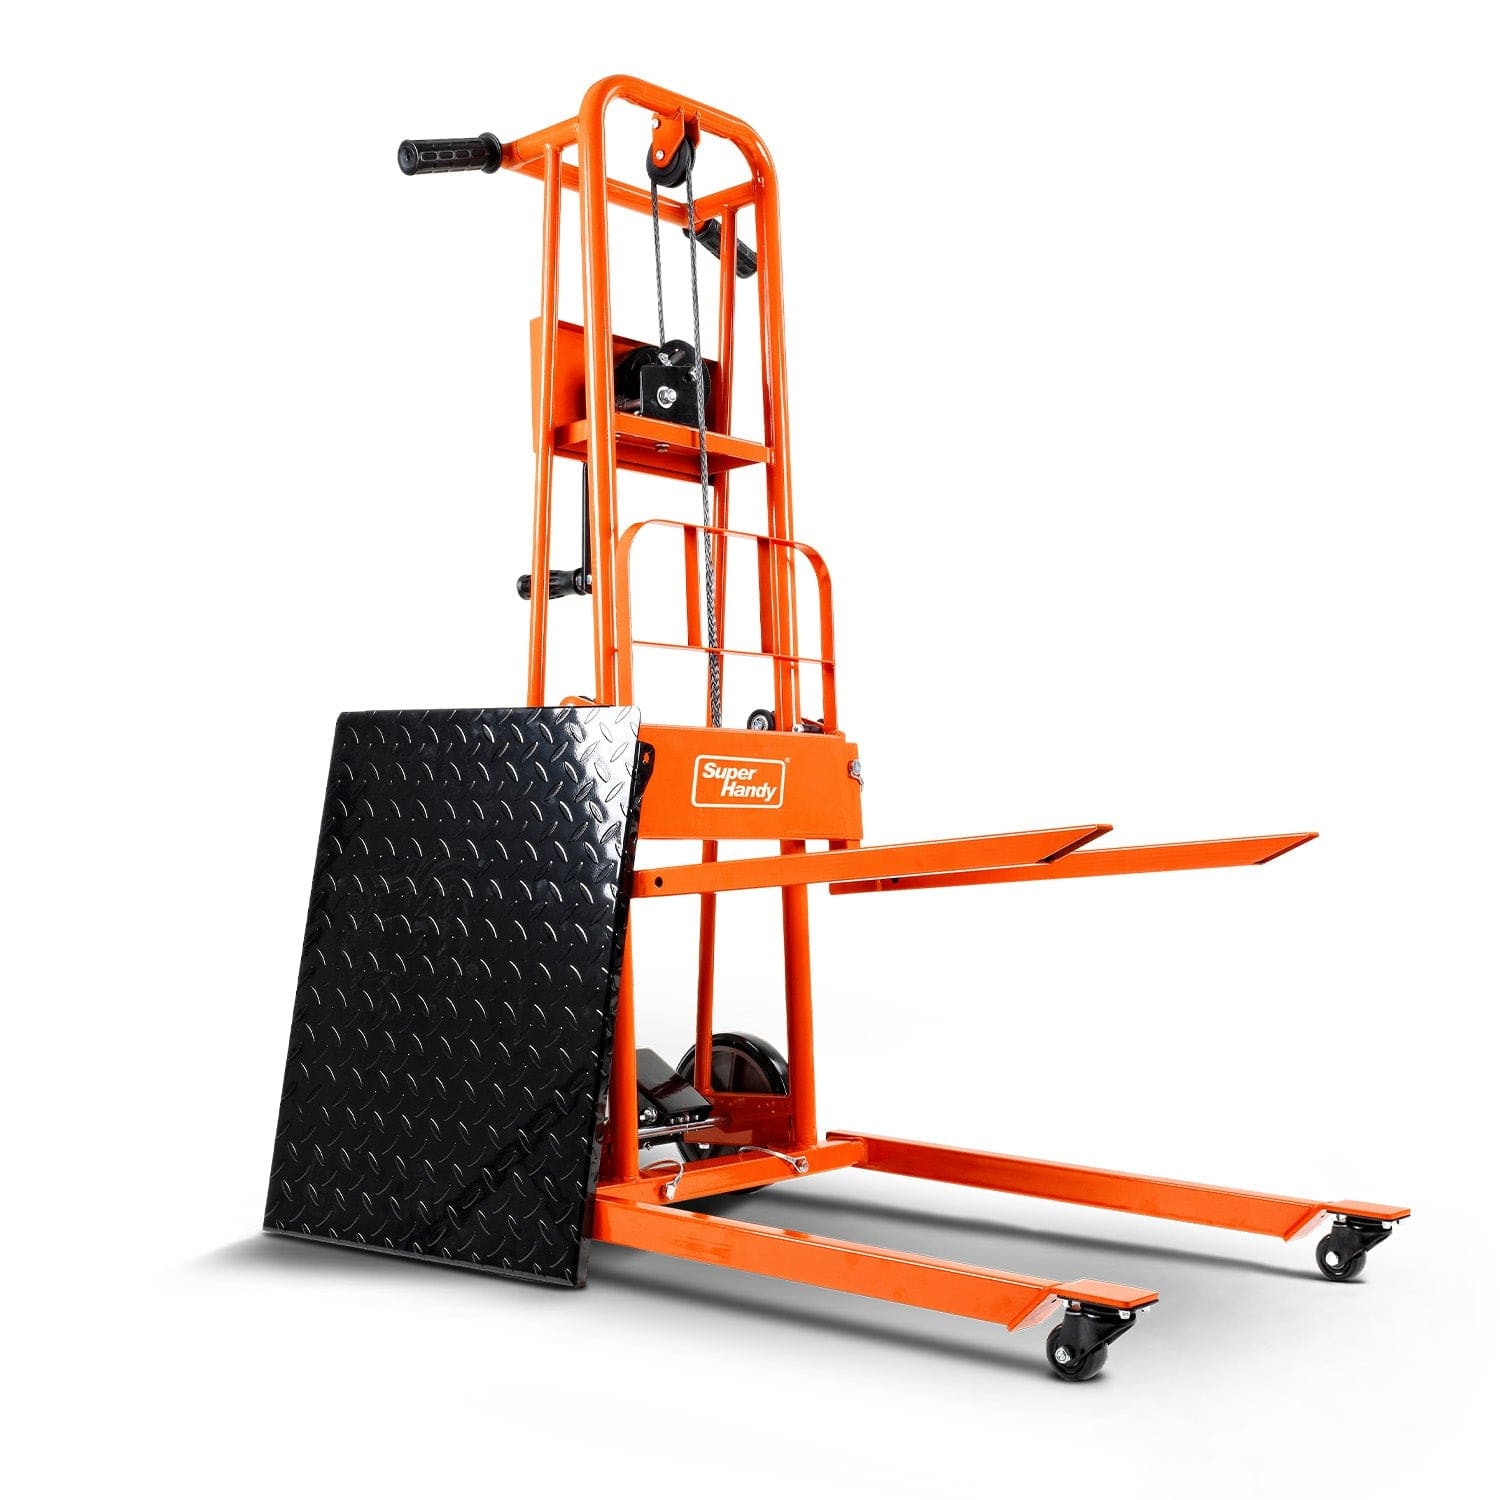 SuperHandy Material Lift Stacker & Pallet Dolly - 330Lb Max Weight, 40" Lift Height